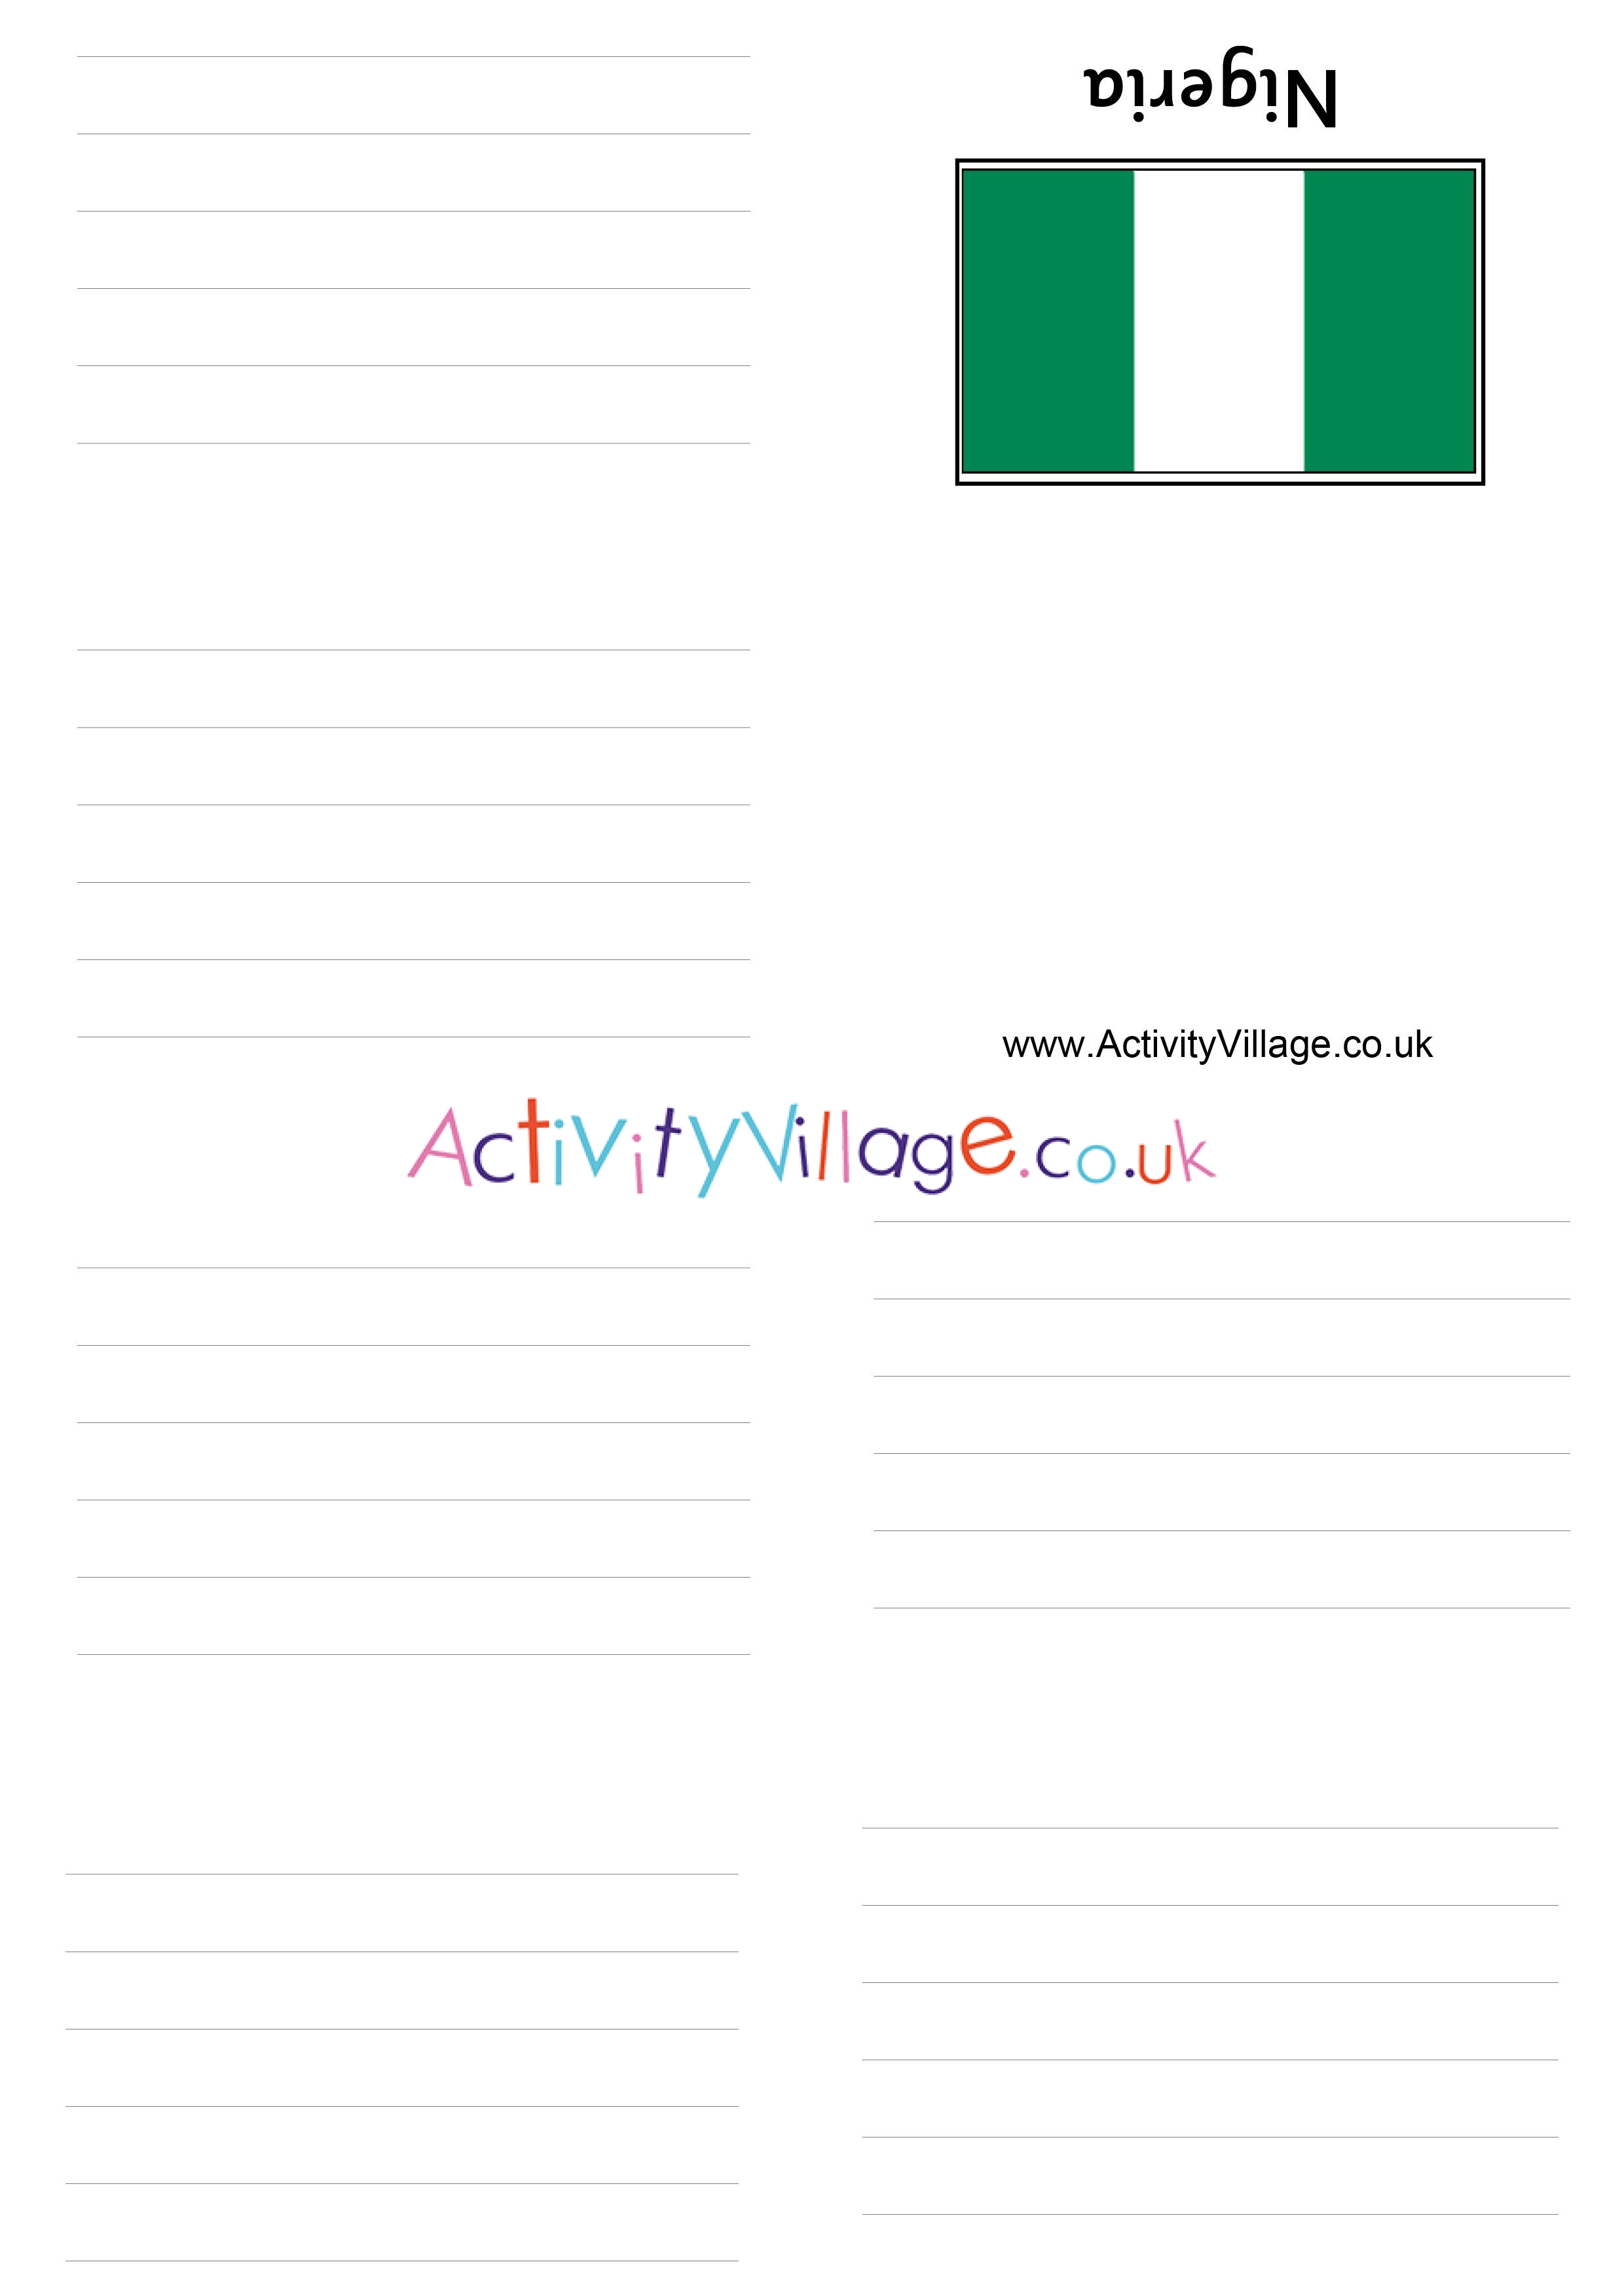 Nigeria booklet - lined